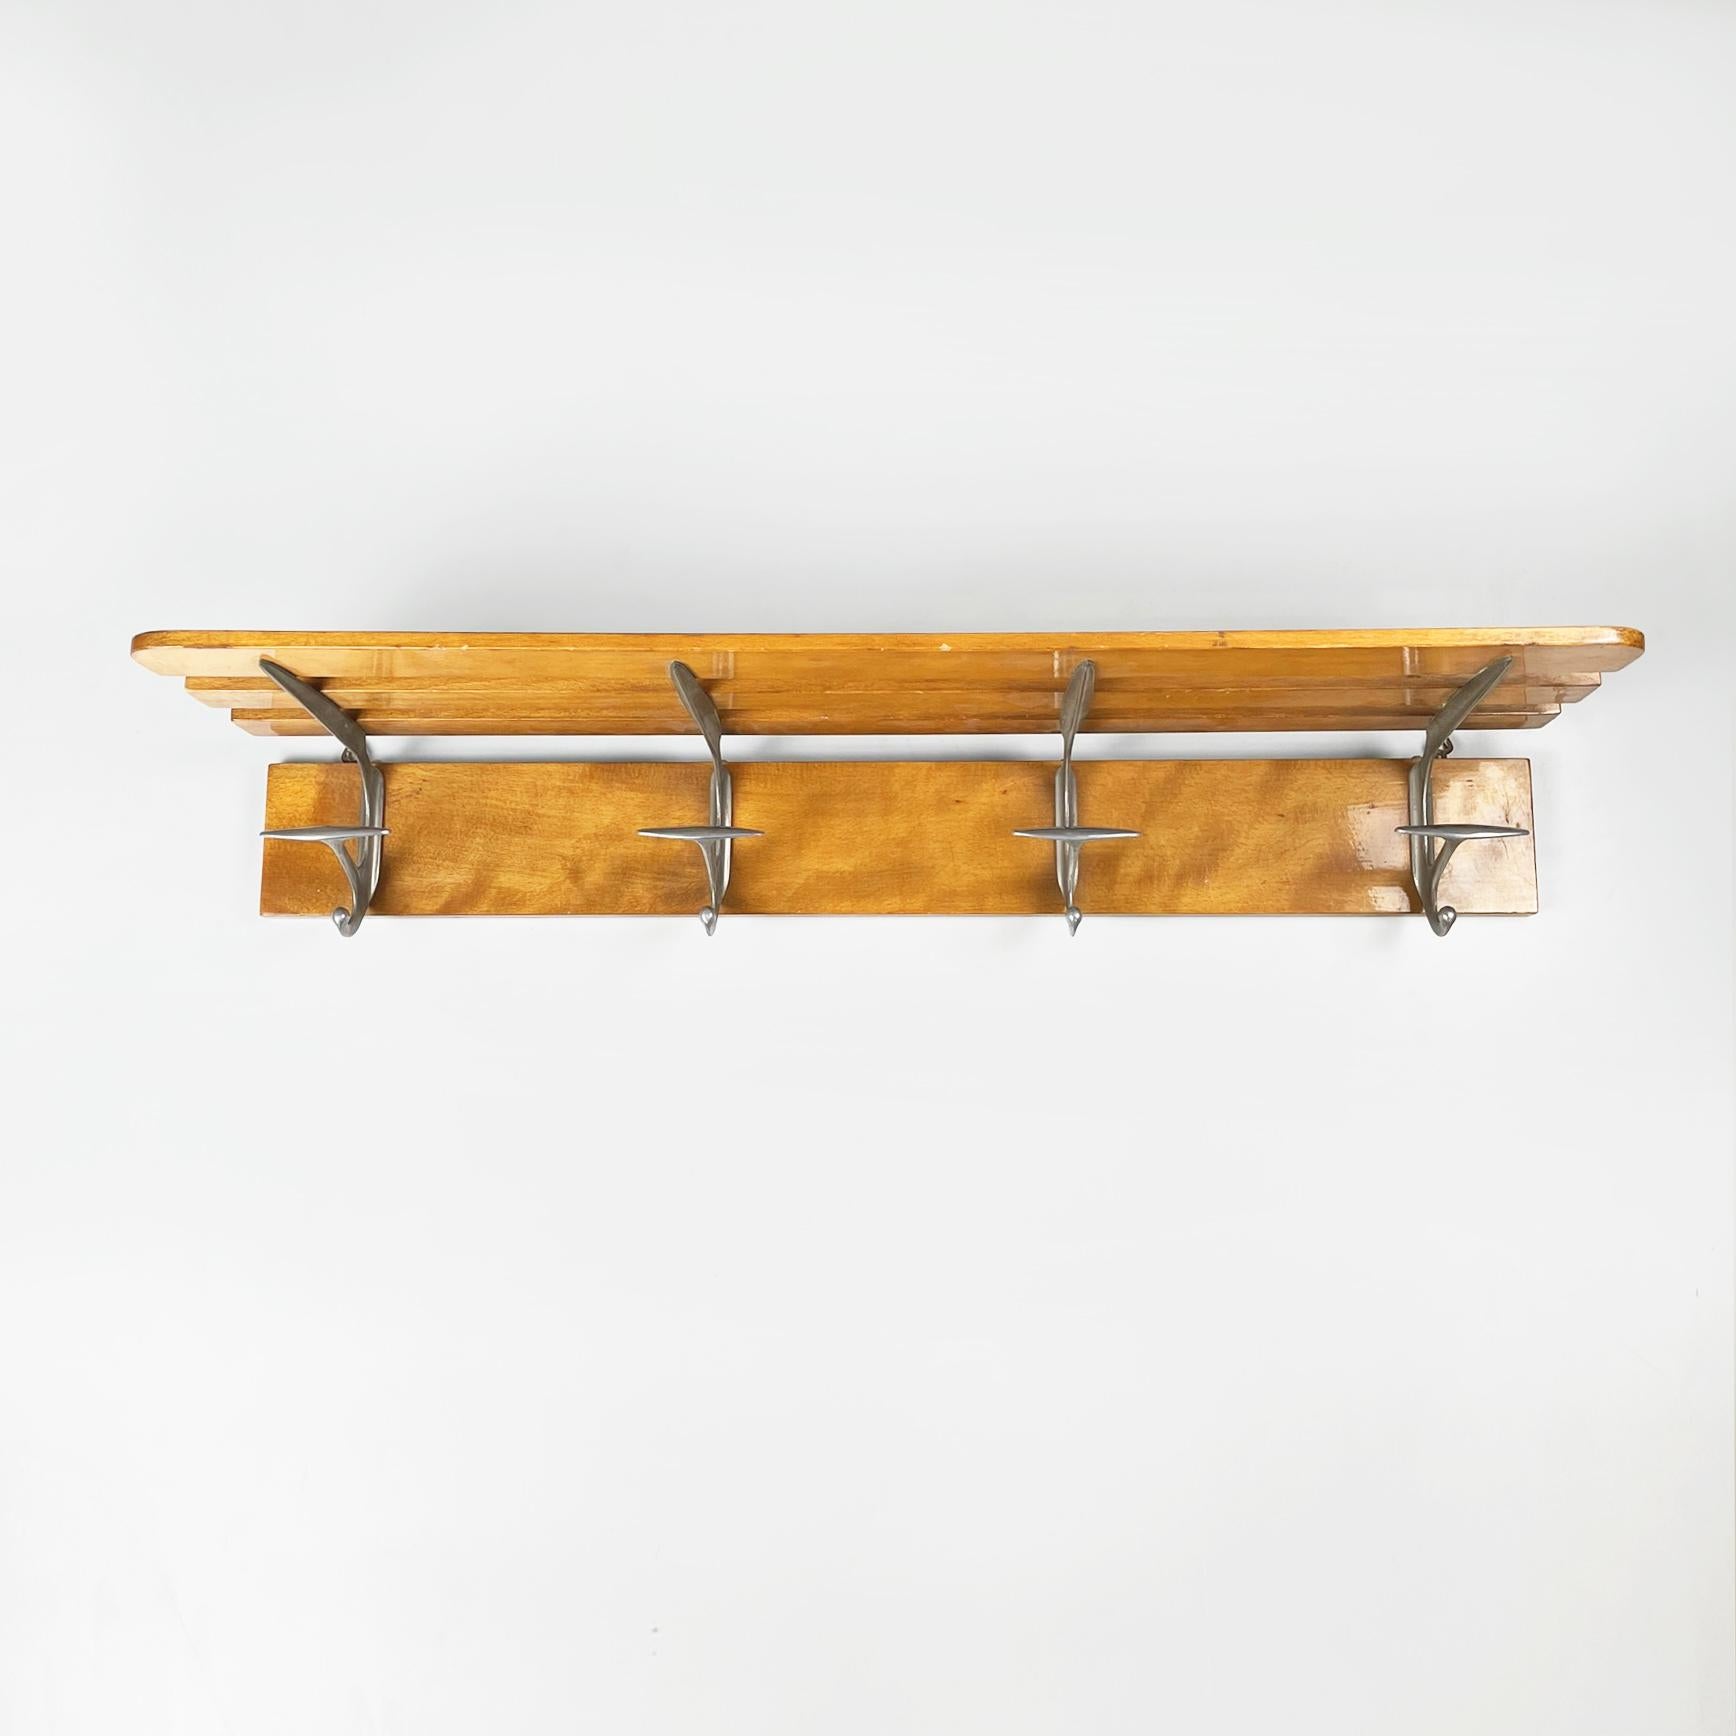 Italian midcentury Wall hat and coat hanger in polished wood and metal by Brevetti Reguitti, 1940s
Wall coat hanger with hat stand in polished light wood and metal. The metal structure features 4 double hooks. The upper part, made up of 4 wooden